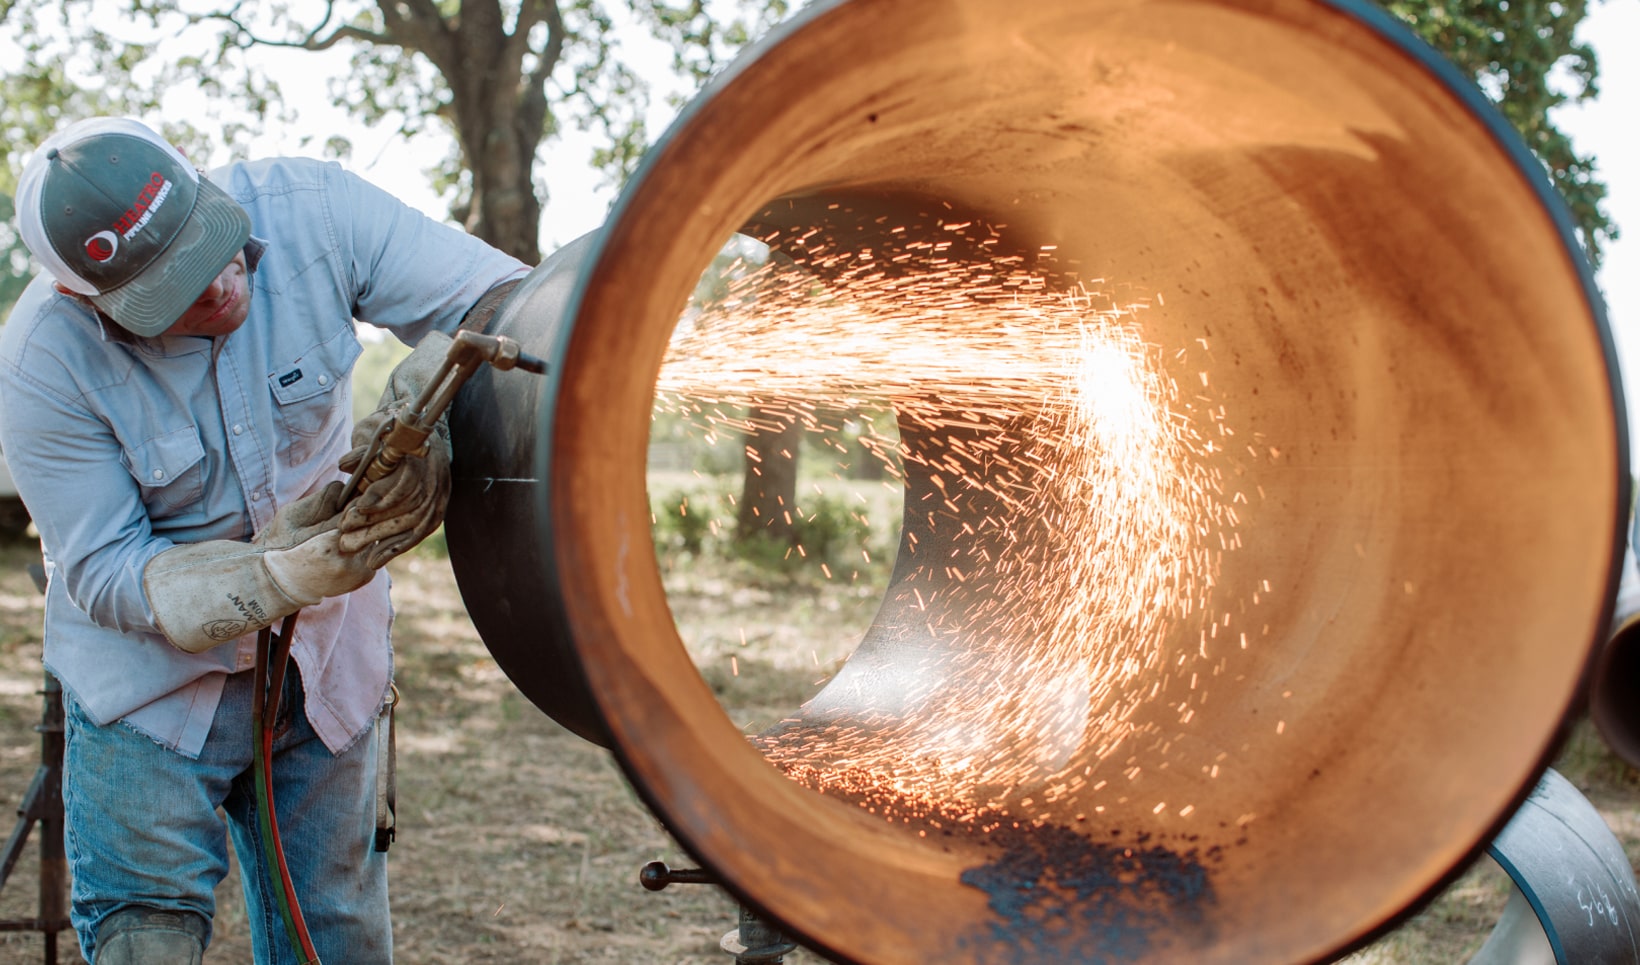 A photograph of a man welding on a pipe.